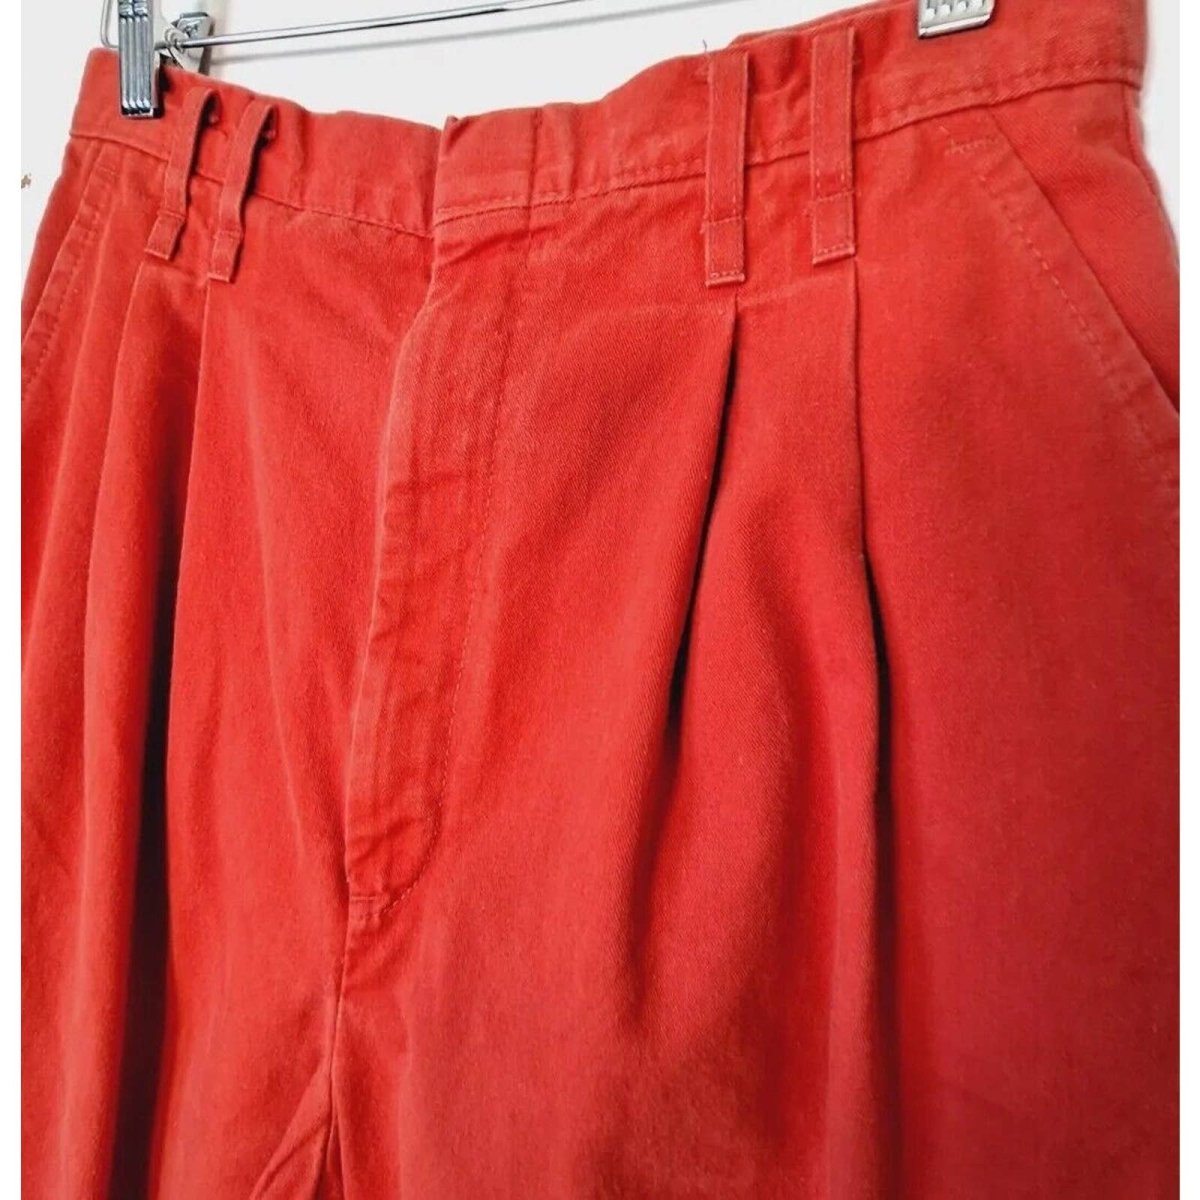 Vintage 80s Red Denim Pants, Pleated Tapered Jeans Size 30x31 - themallvintage The Mall Vintage